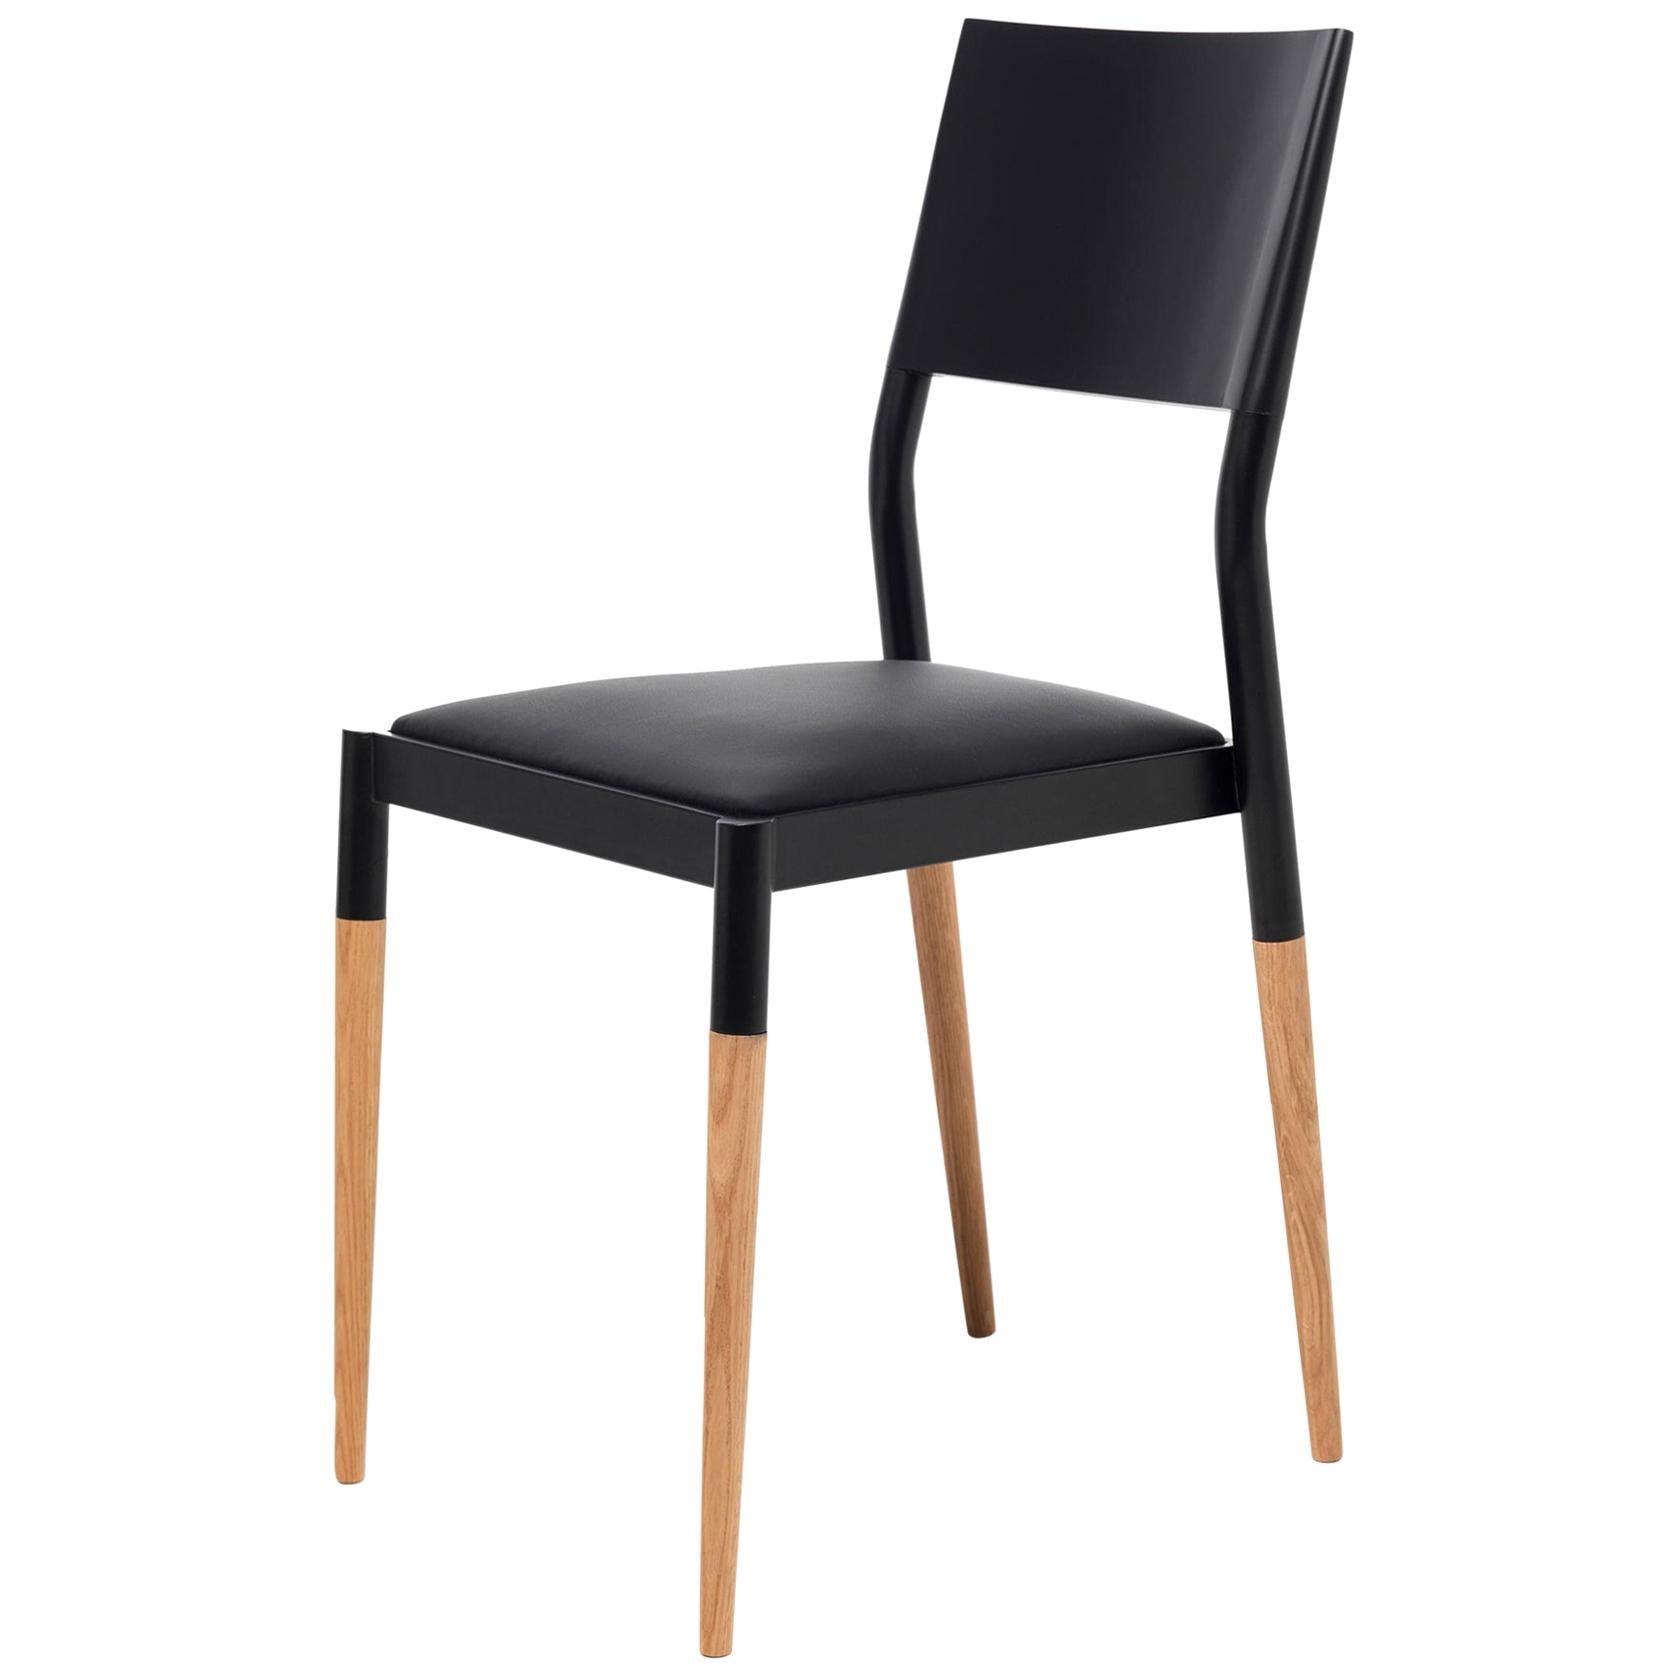 21st Century Modern Steel And Wood Chair With Leather Upholstered Seat